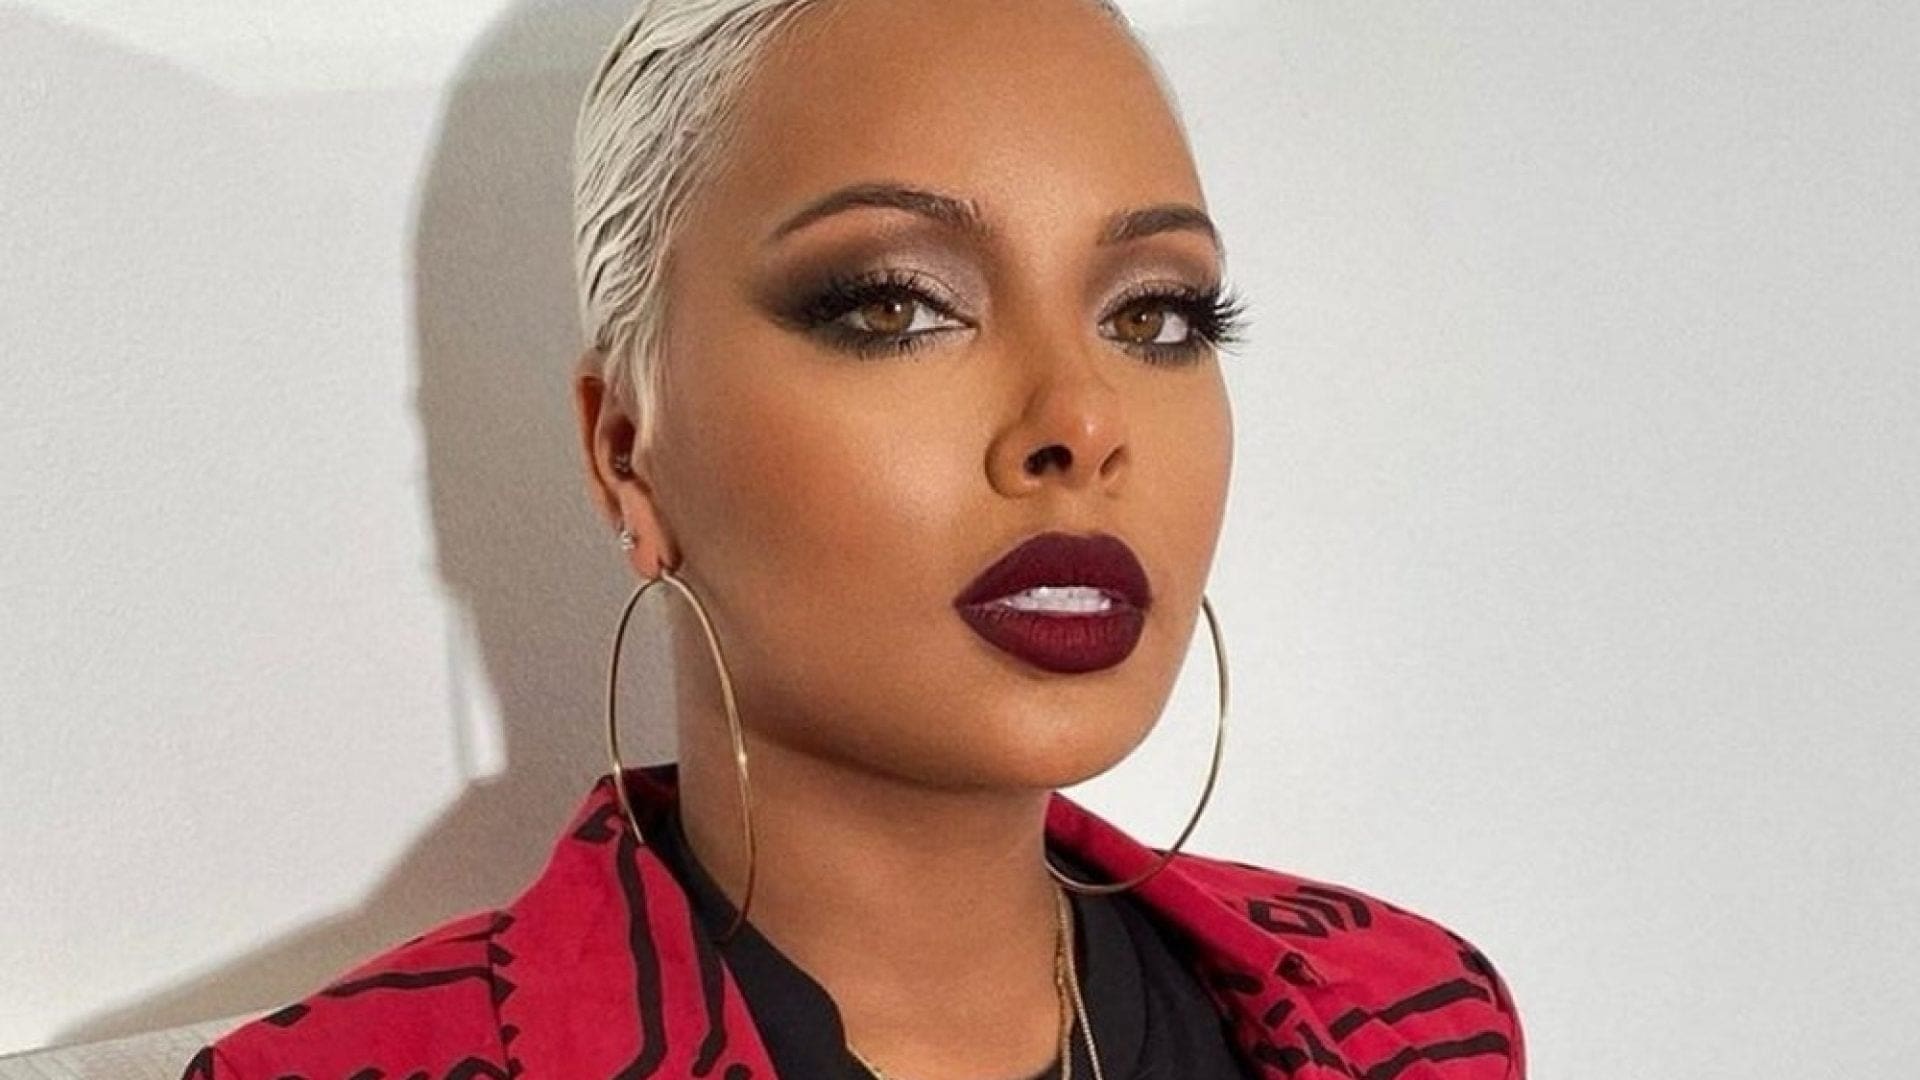 Eva Marcille Is Enraged Following The George Floyd Case - The Unarmed Black Man Dies After Police Officer Kneeled On His Neck